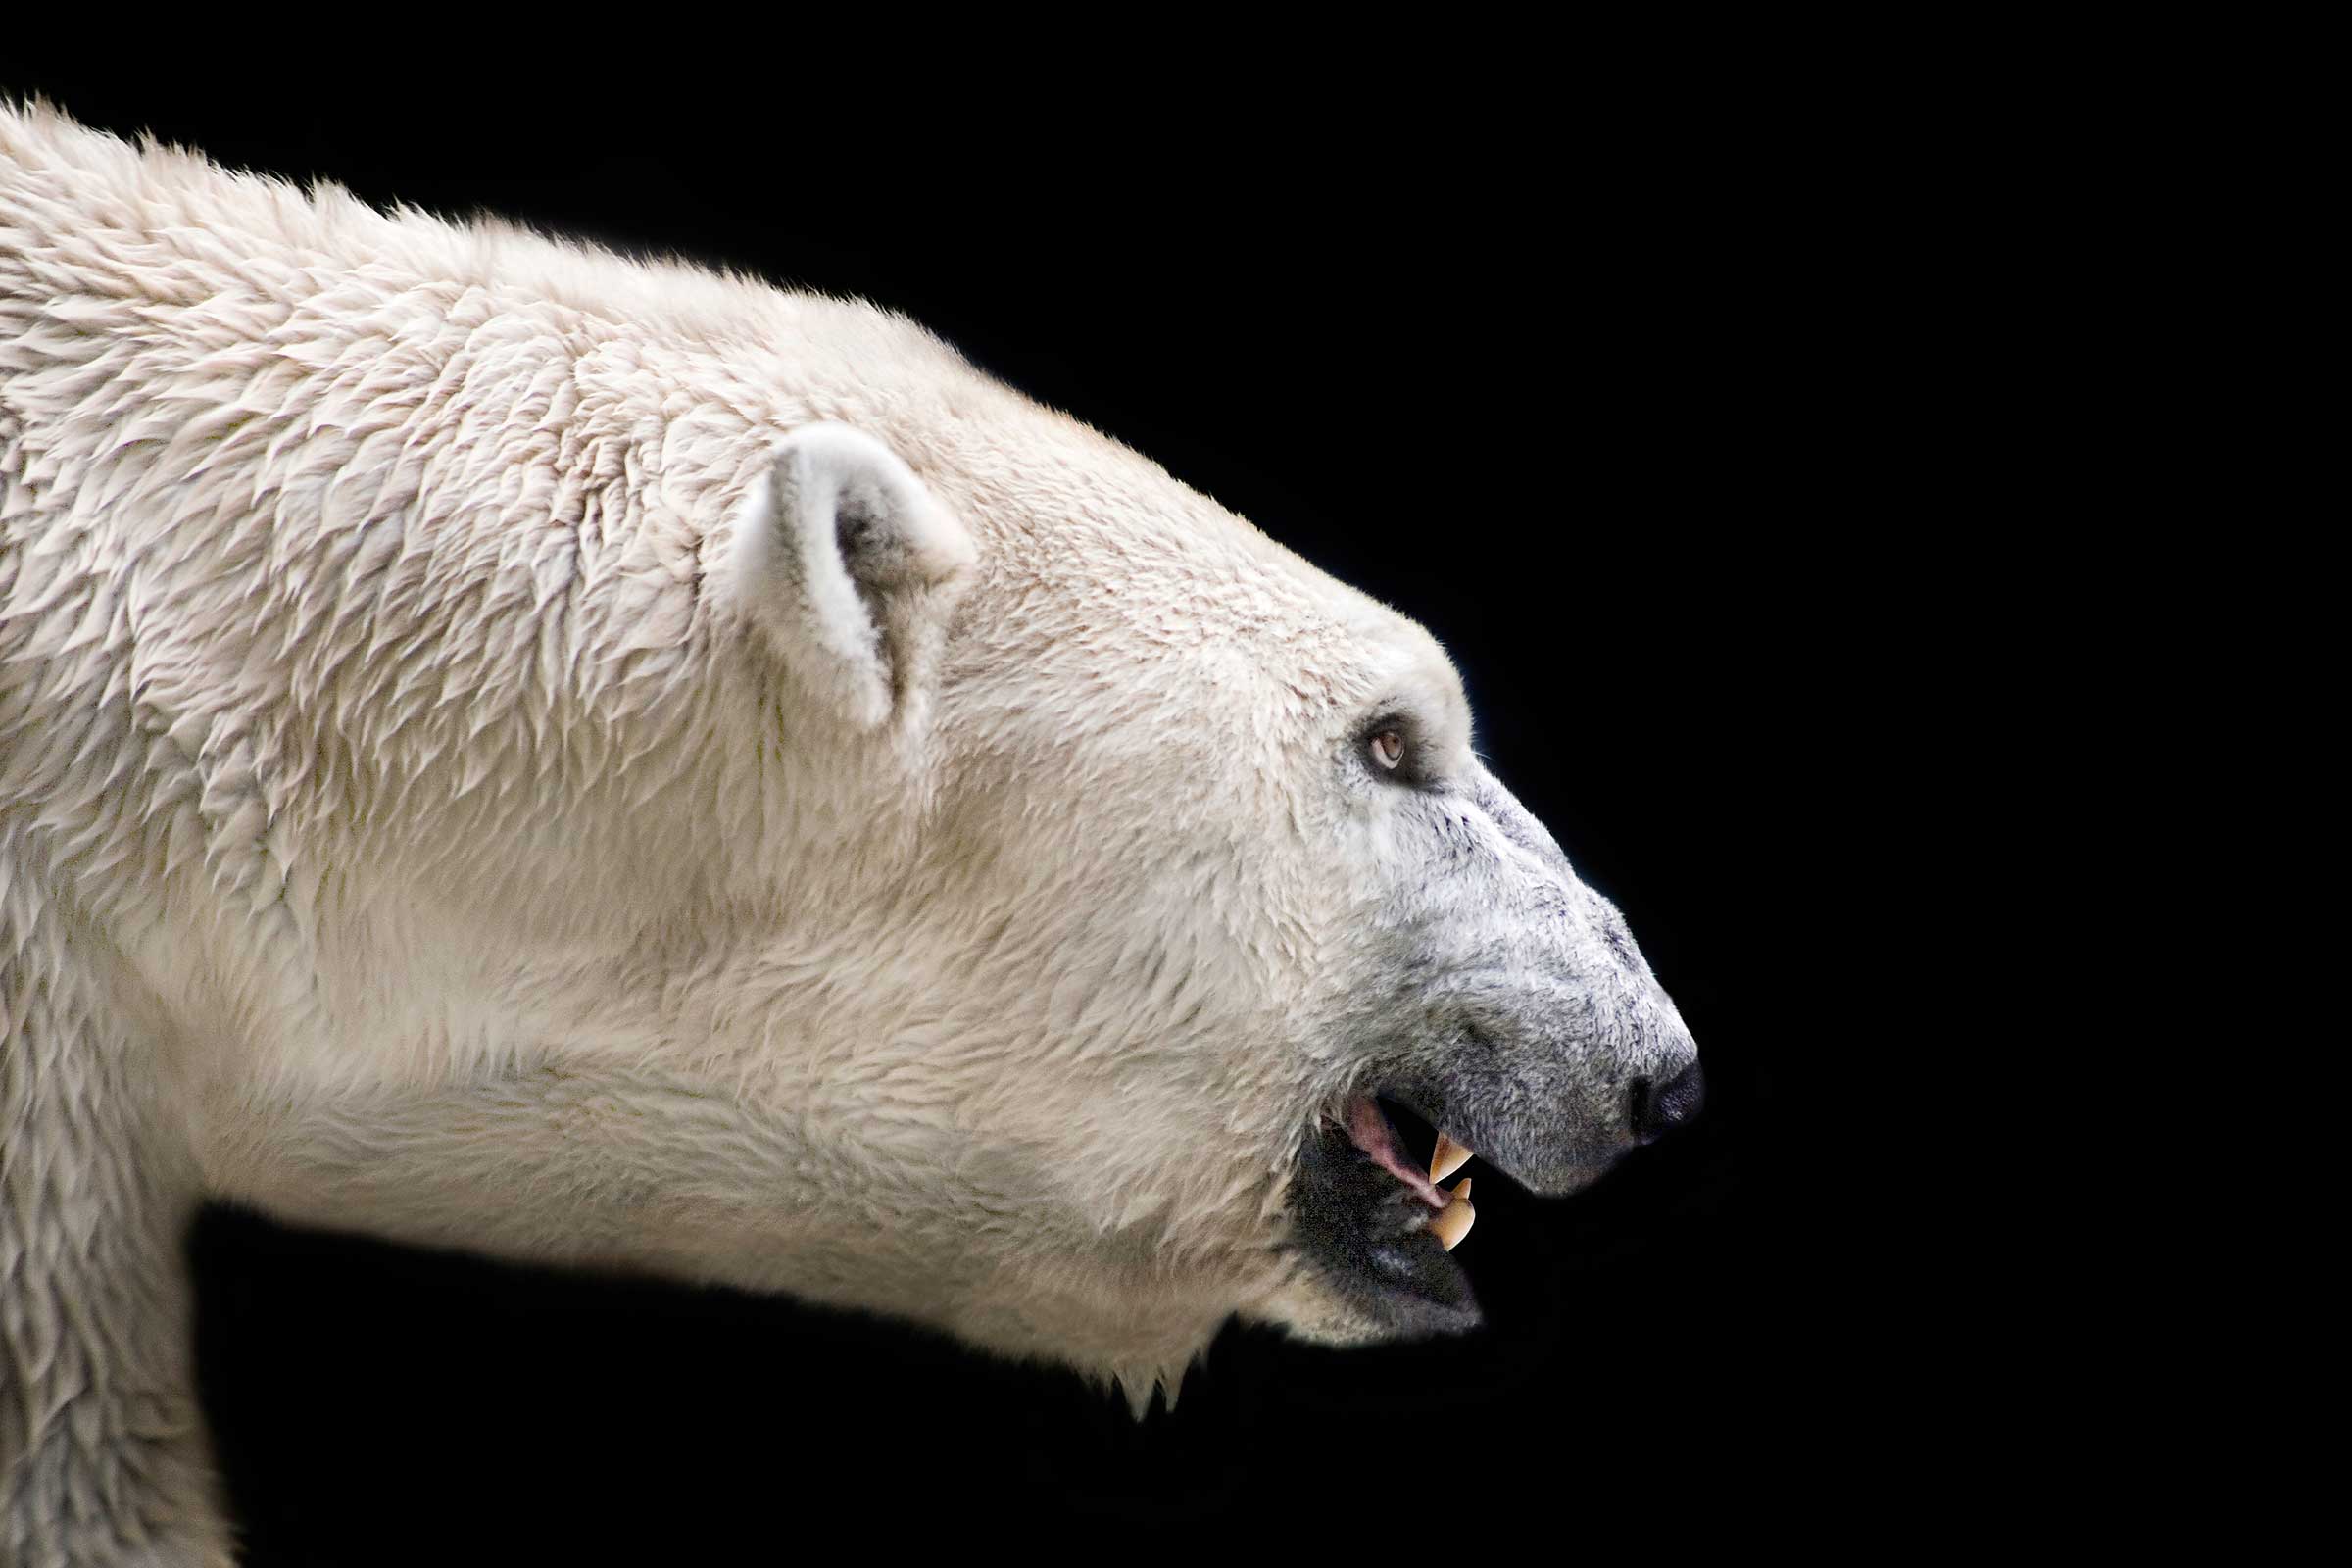 How One Man Escaped a Polar Bear Attack | Reader's Digest